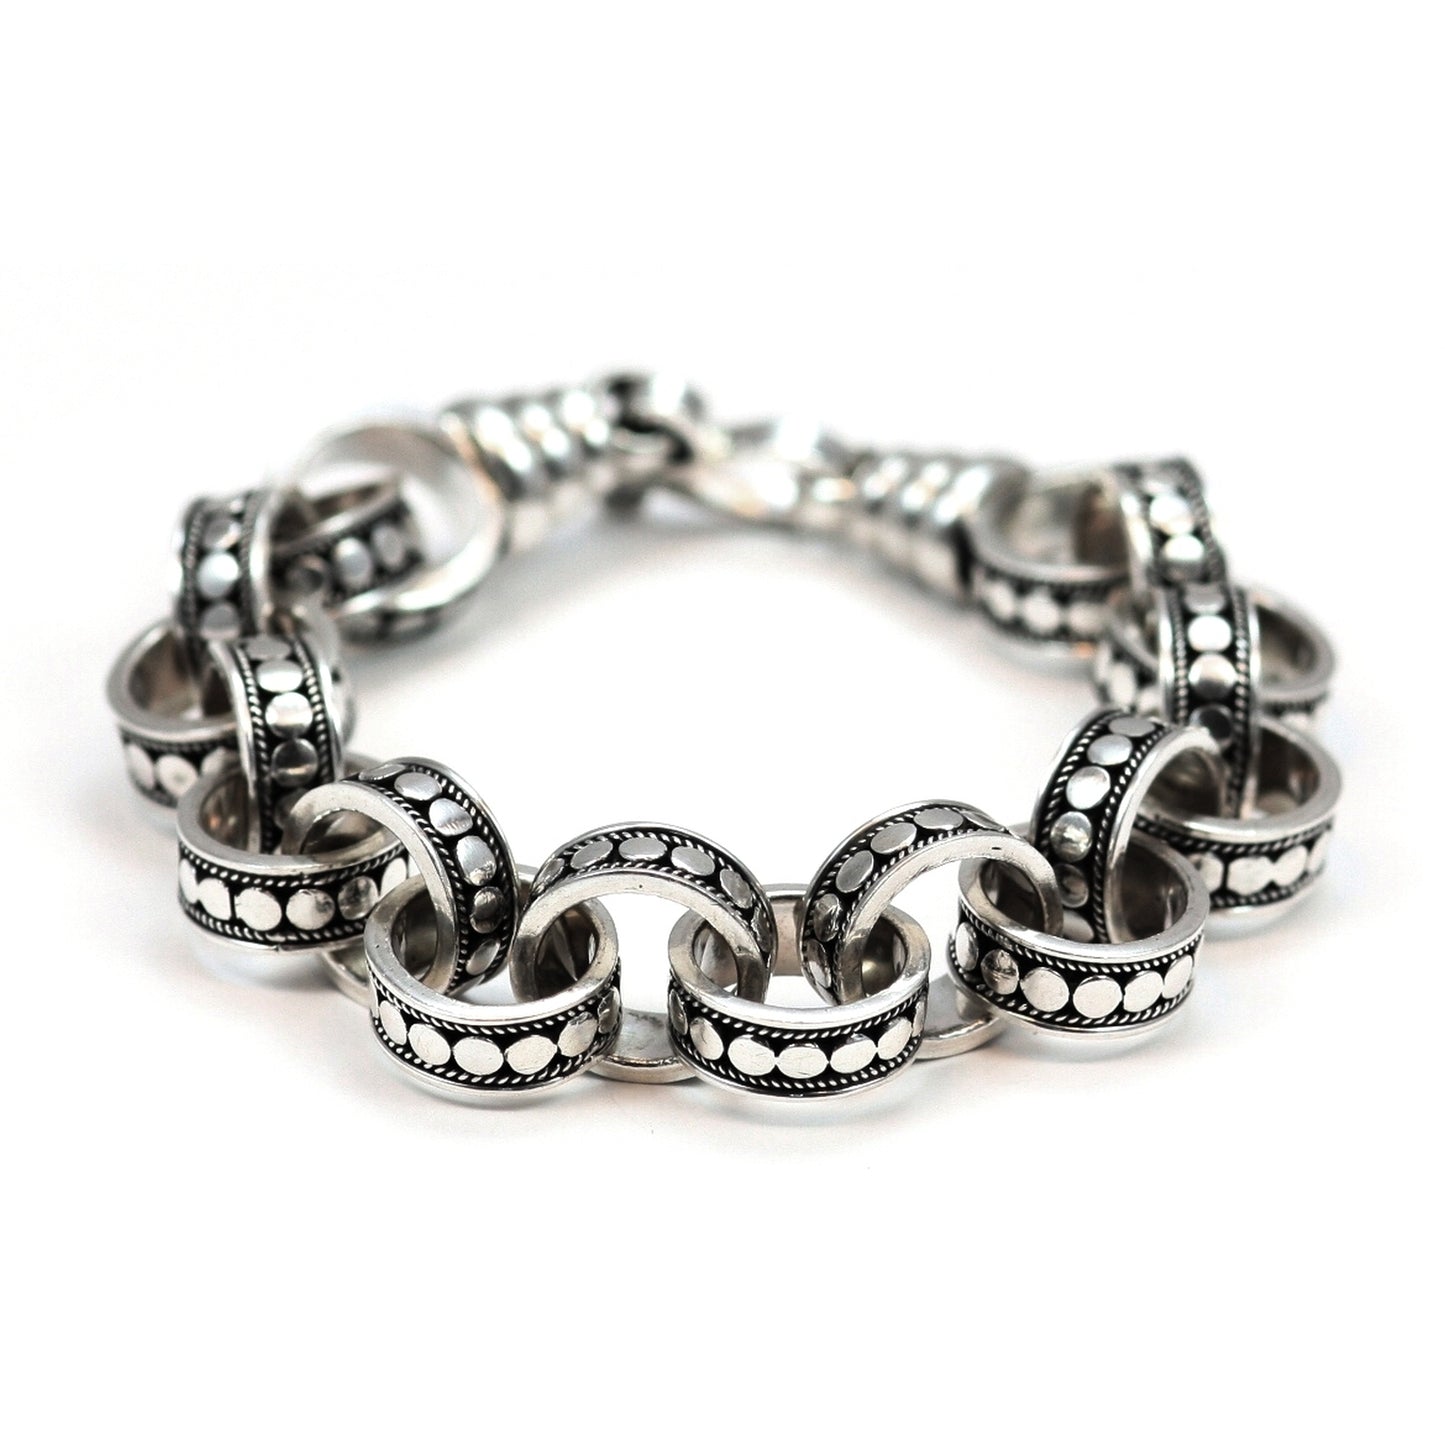 Silver ring link bracelet with polished dots and dark oxidized background.